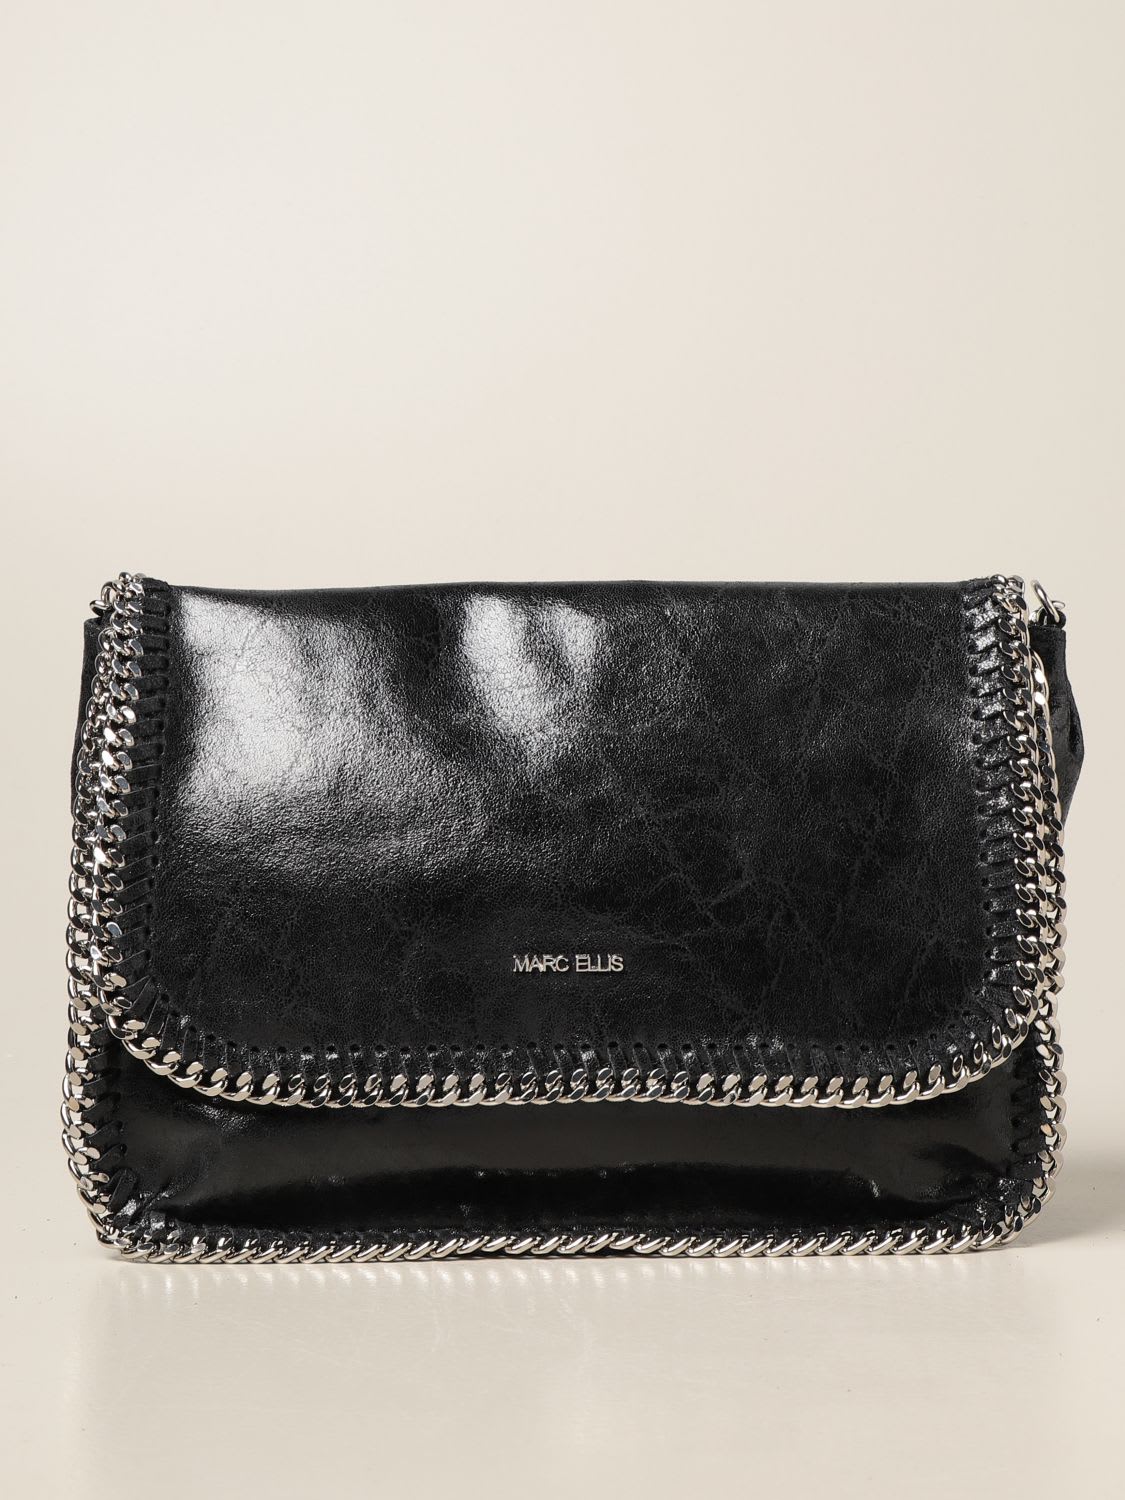 Marc Ellis Crossbody Bags Winona Marc Ellis Bag In Textured Leather With Chain